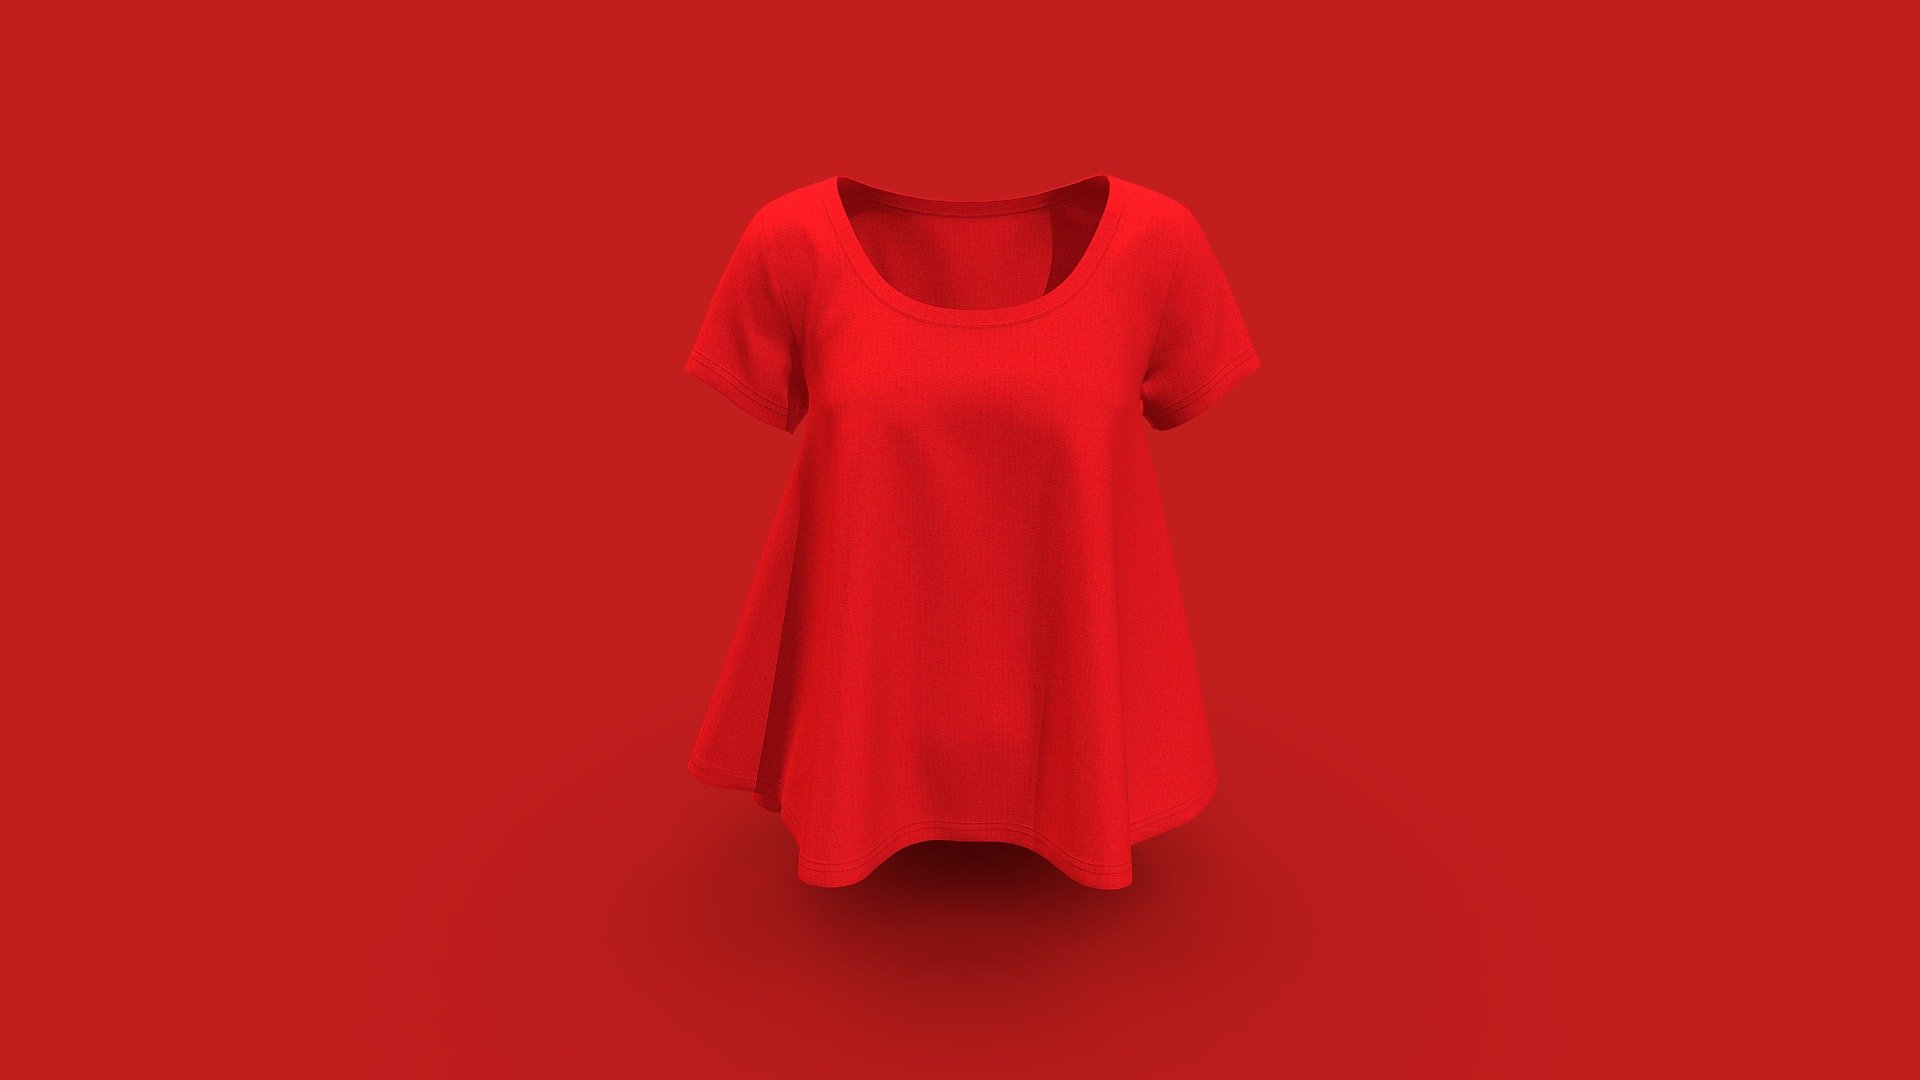 Cloth Title = Women Basic Short Sleeve Crop Top 

SKU = DG100065 

Category = Women 

Product Type = Top 

Cloth Length = Cropped 

Body Fit = Relaxed Fit 

Occasion = Casual  

Sleeve Style = Set In Sleeve


Our Services:

3D Apparel Design.

OBJ,FBX,GLTF Making with High/Low Poly.

Fabric Digitalization.

Mockup making.

3D Teck Pack.

Pattern Making.

2D Illustration.

Cloth Animation and 360 Spin Video.


Contact us:- 

Email: info@digitalfashionwear.com 

Website: https://digitalfashionwear.com 

WhatsApp No: +8801759350445 


We designed all the types of cloth specially focused on product visualization, e-commerce, fitting, and production. 

We will design: 

T-shirts 

Polo shirts 

Hoodies 

Sweatshirt 

Jackets 

Shirts 

TankTops 

Trousers 

Bras 

Underwear 

Blazer 

Aprons 

Leggings 

and All Fashion items. 





Our goal is to make sure what we provide you, meets your demand 3d model